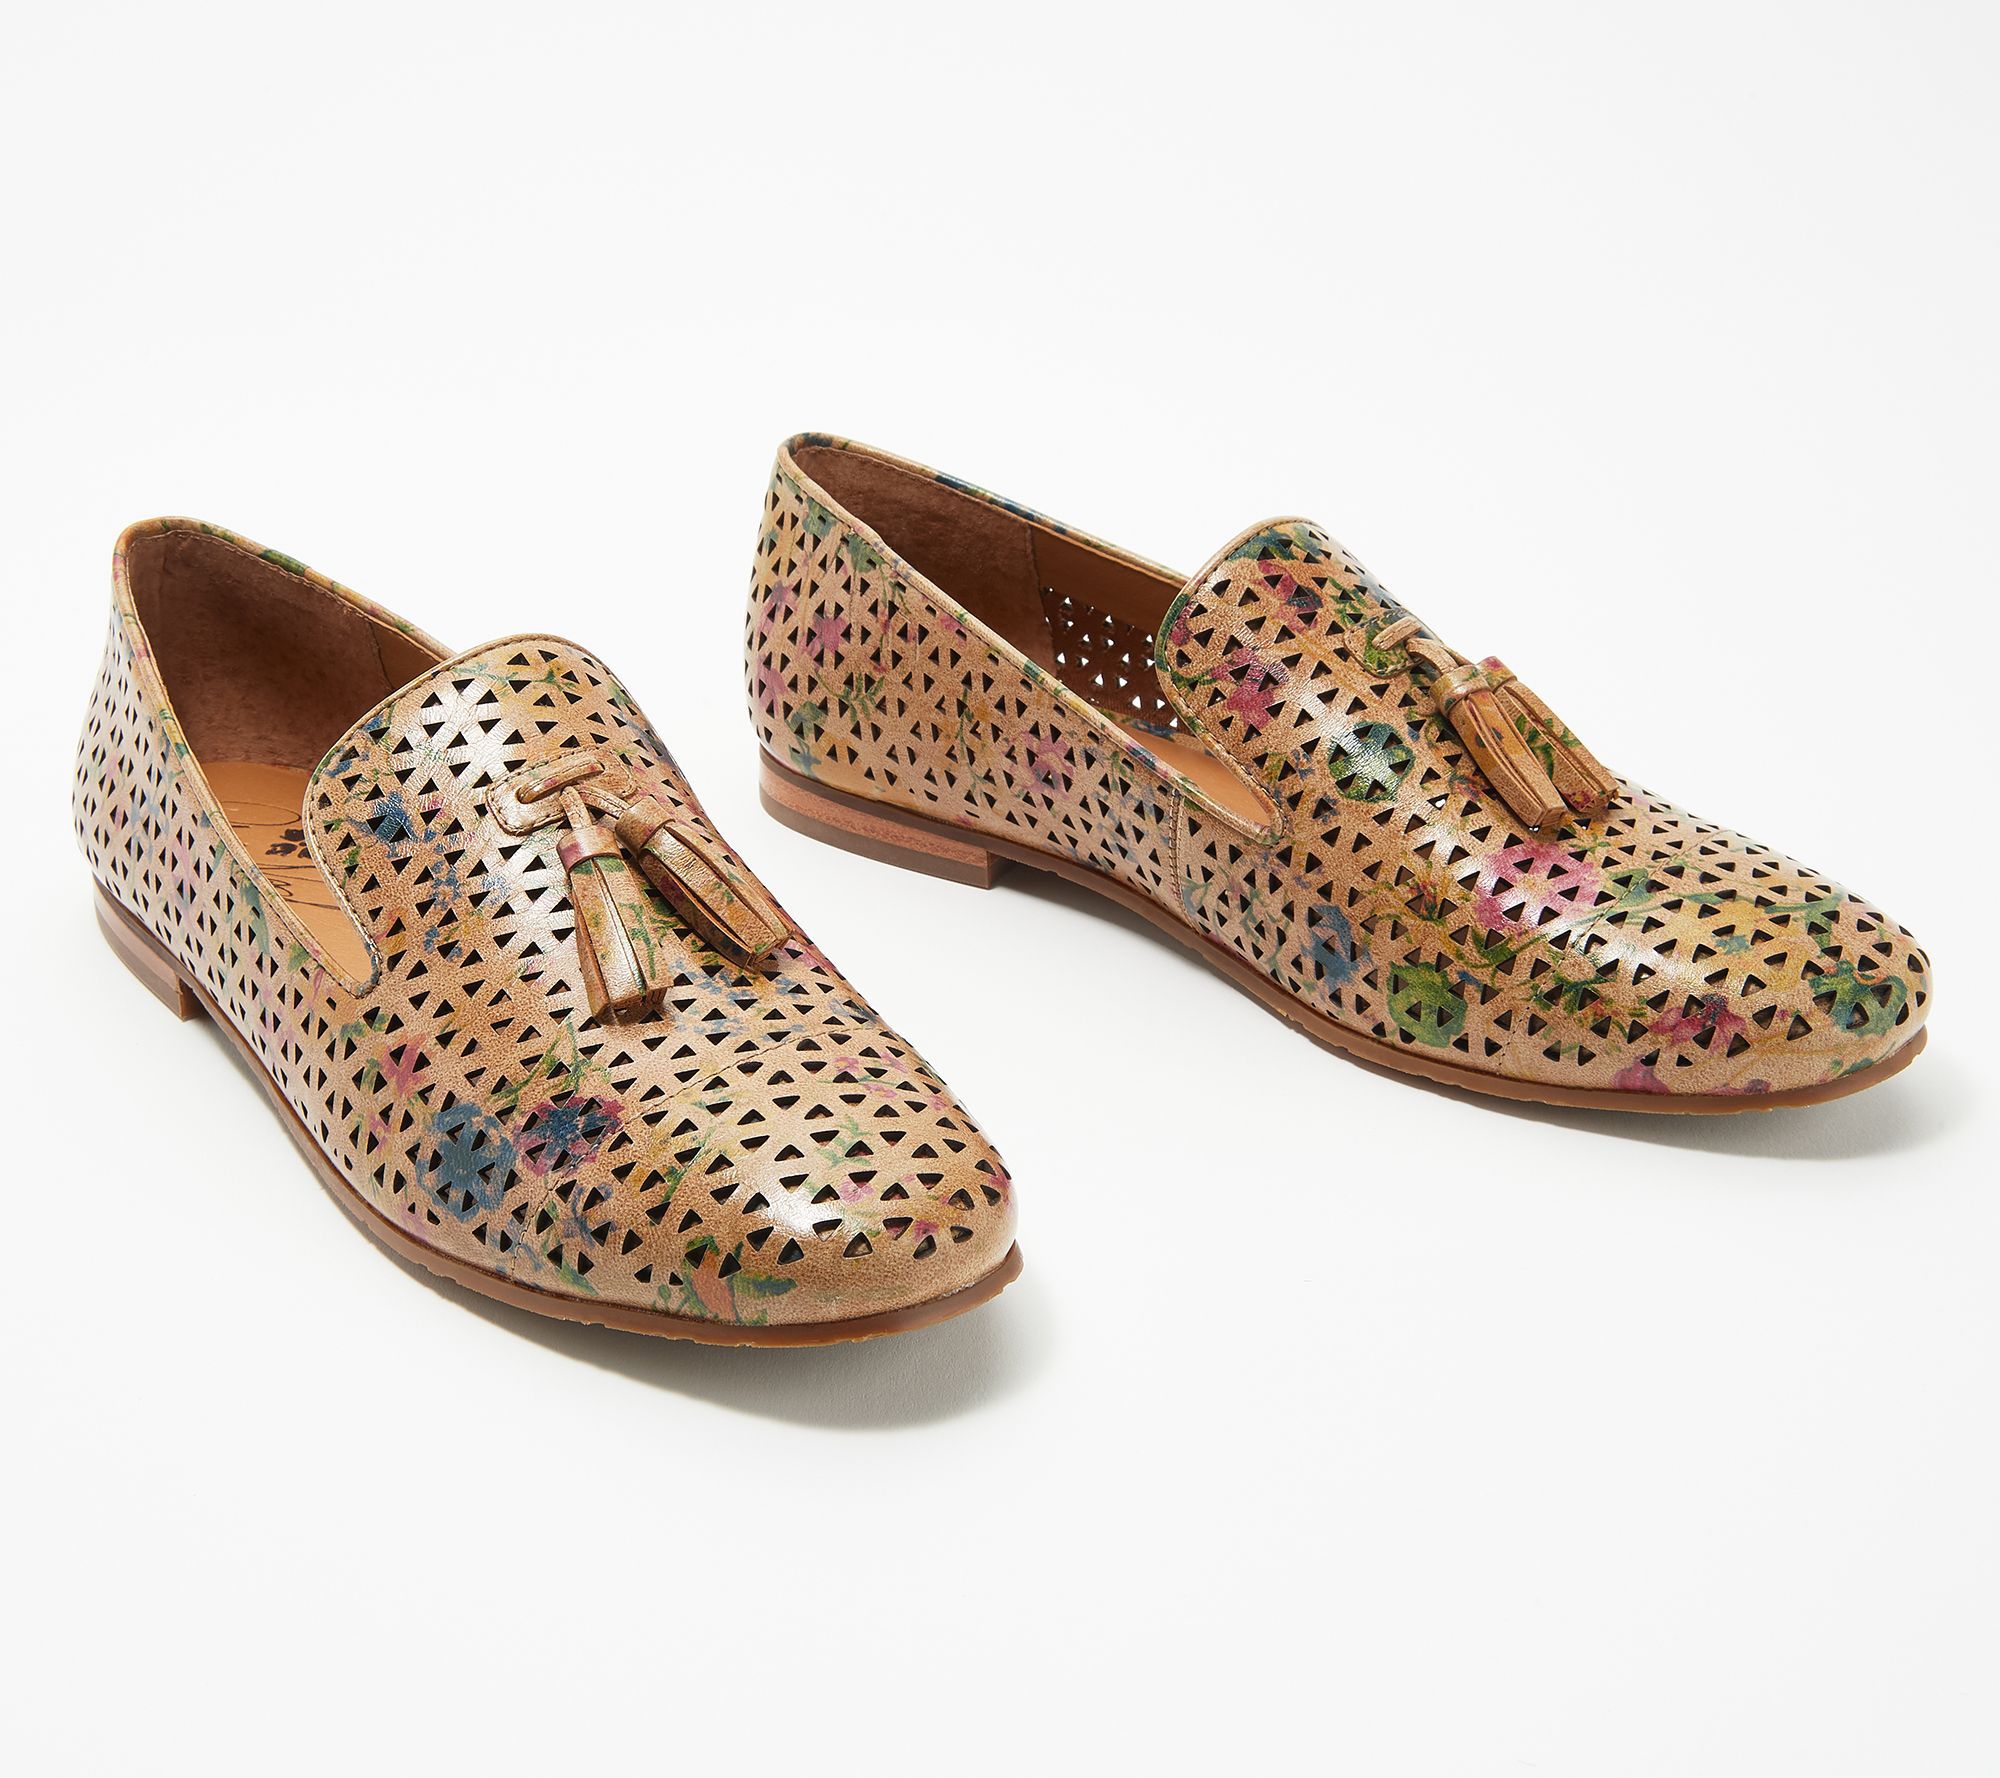 Patricia Nash Perforated Leather Loafers - Francesca - QVC.com